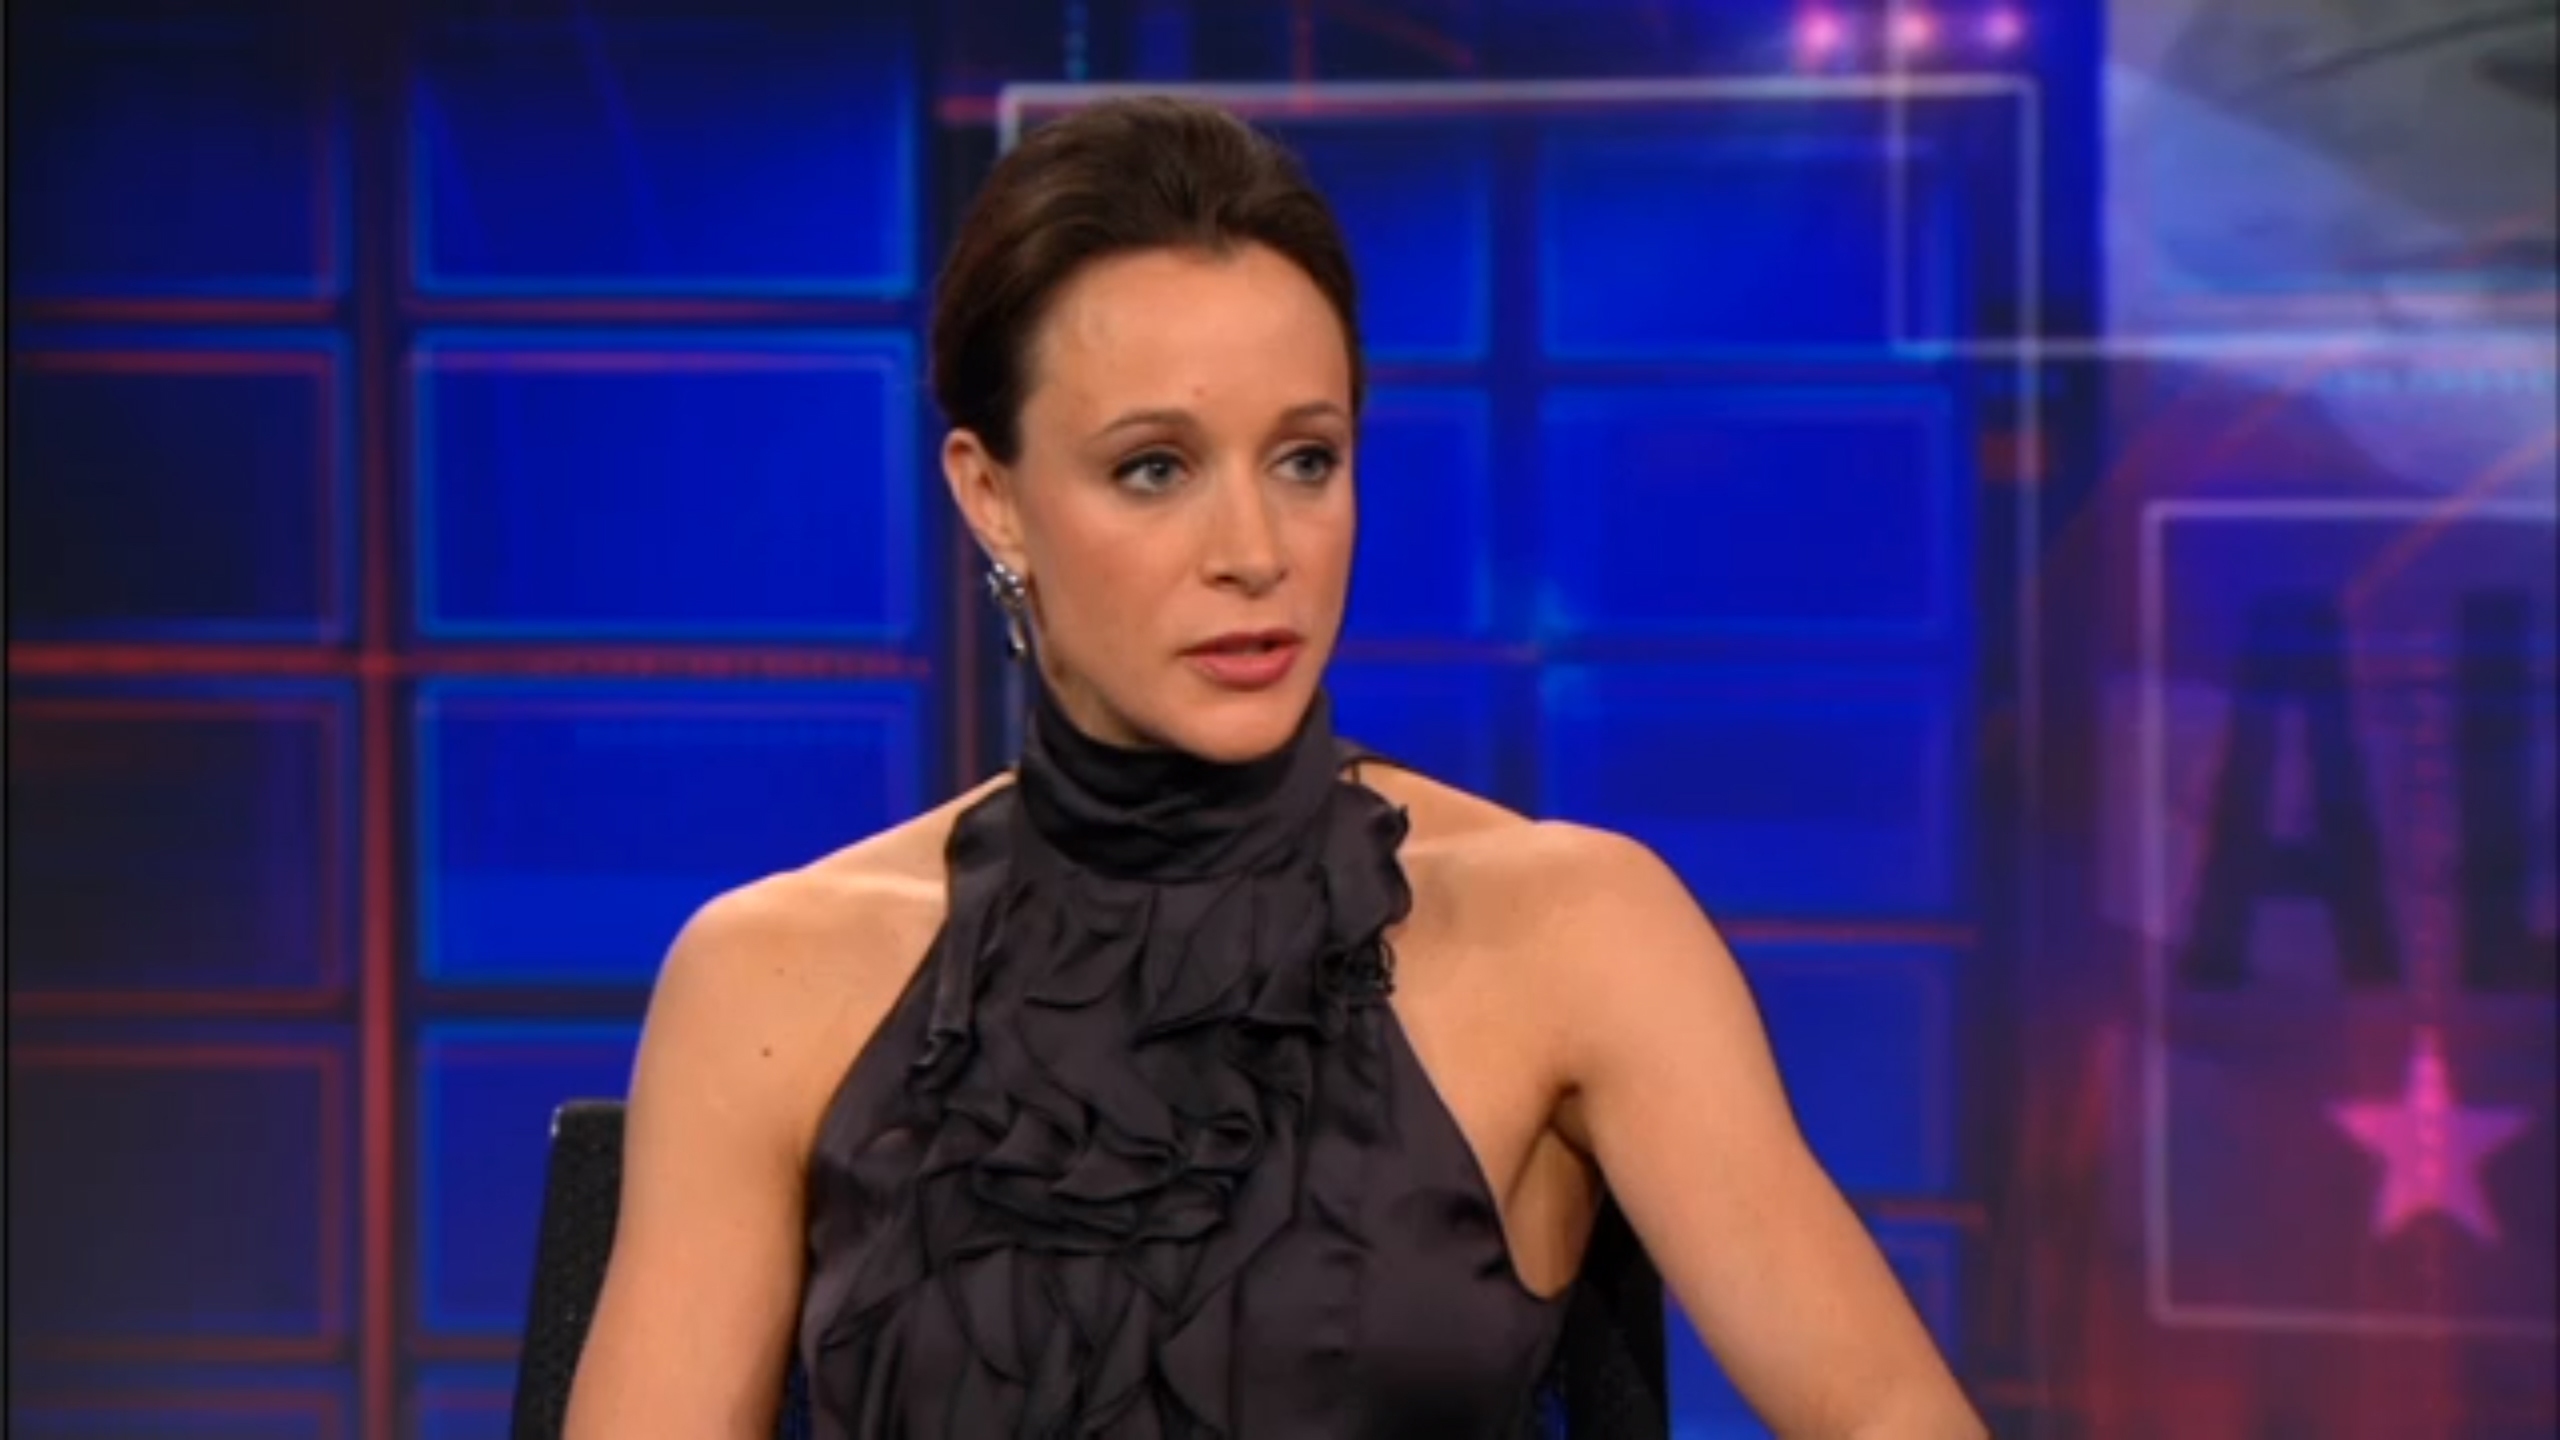 Paula Broadwell's right to bare arms